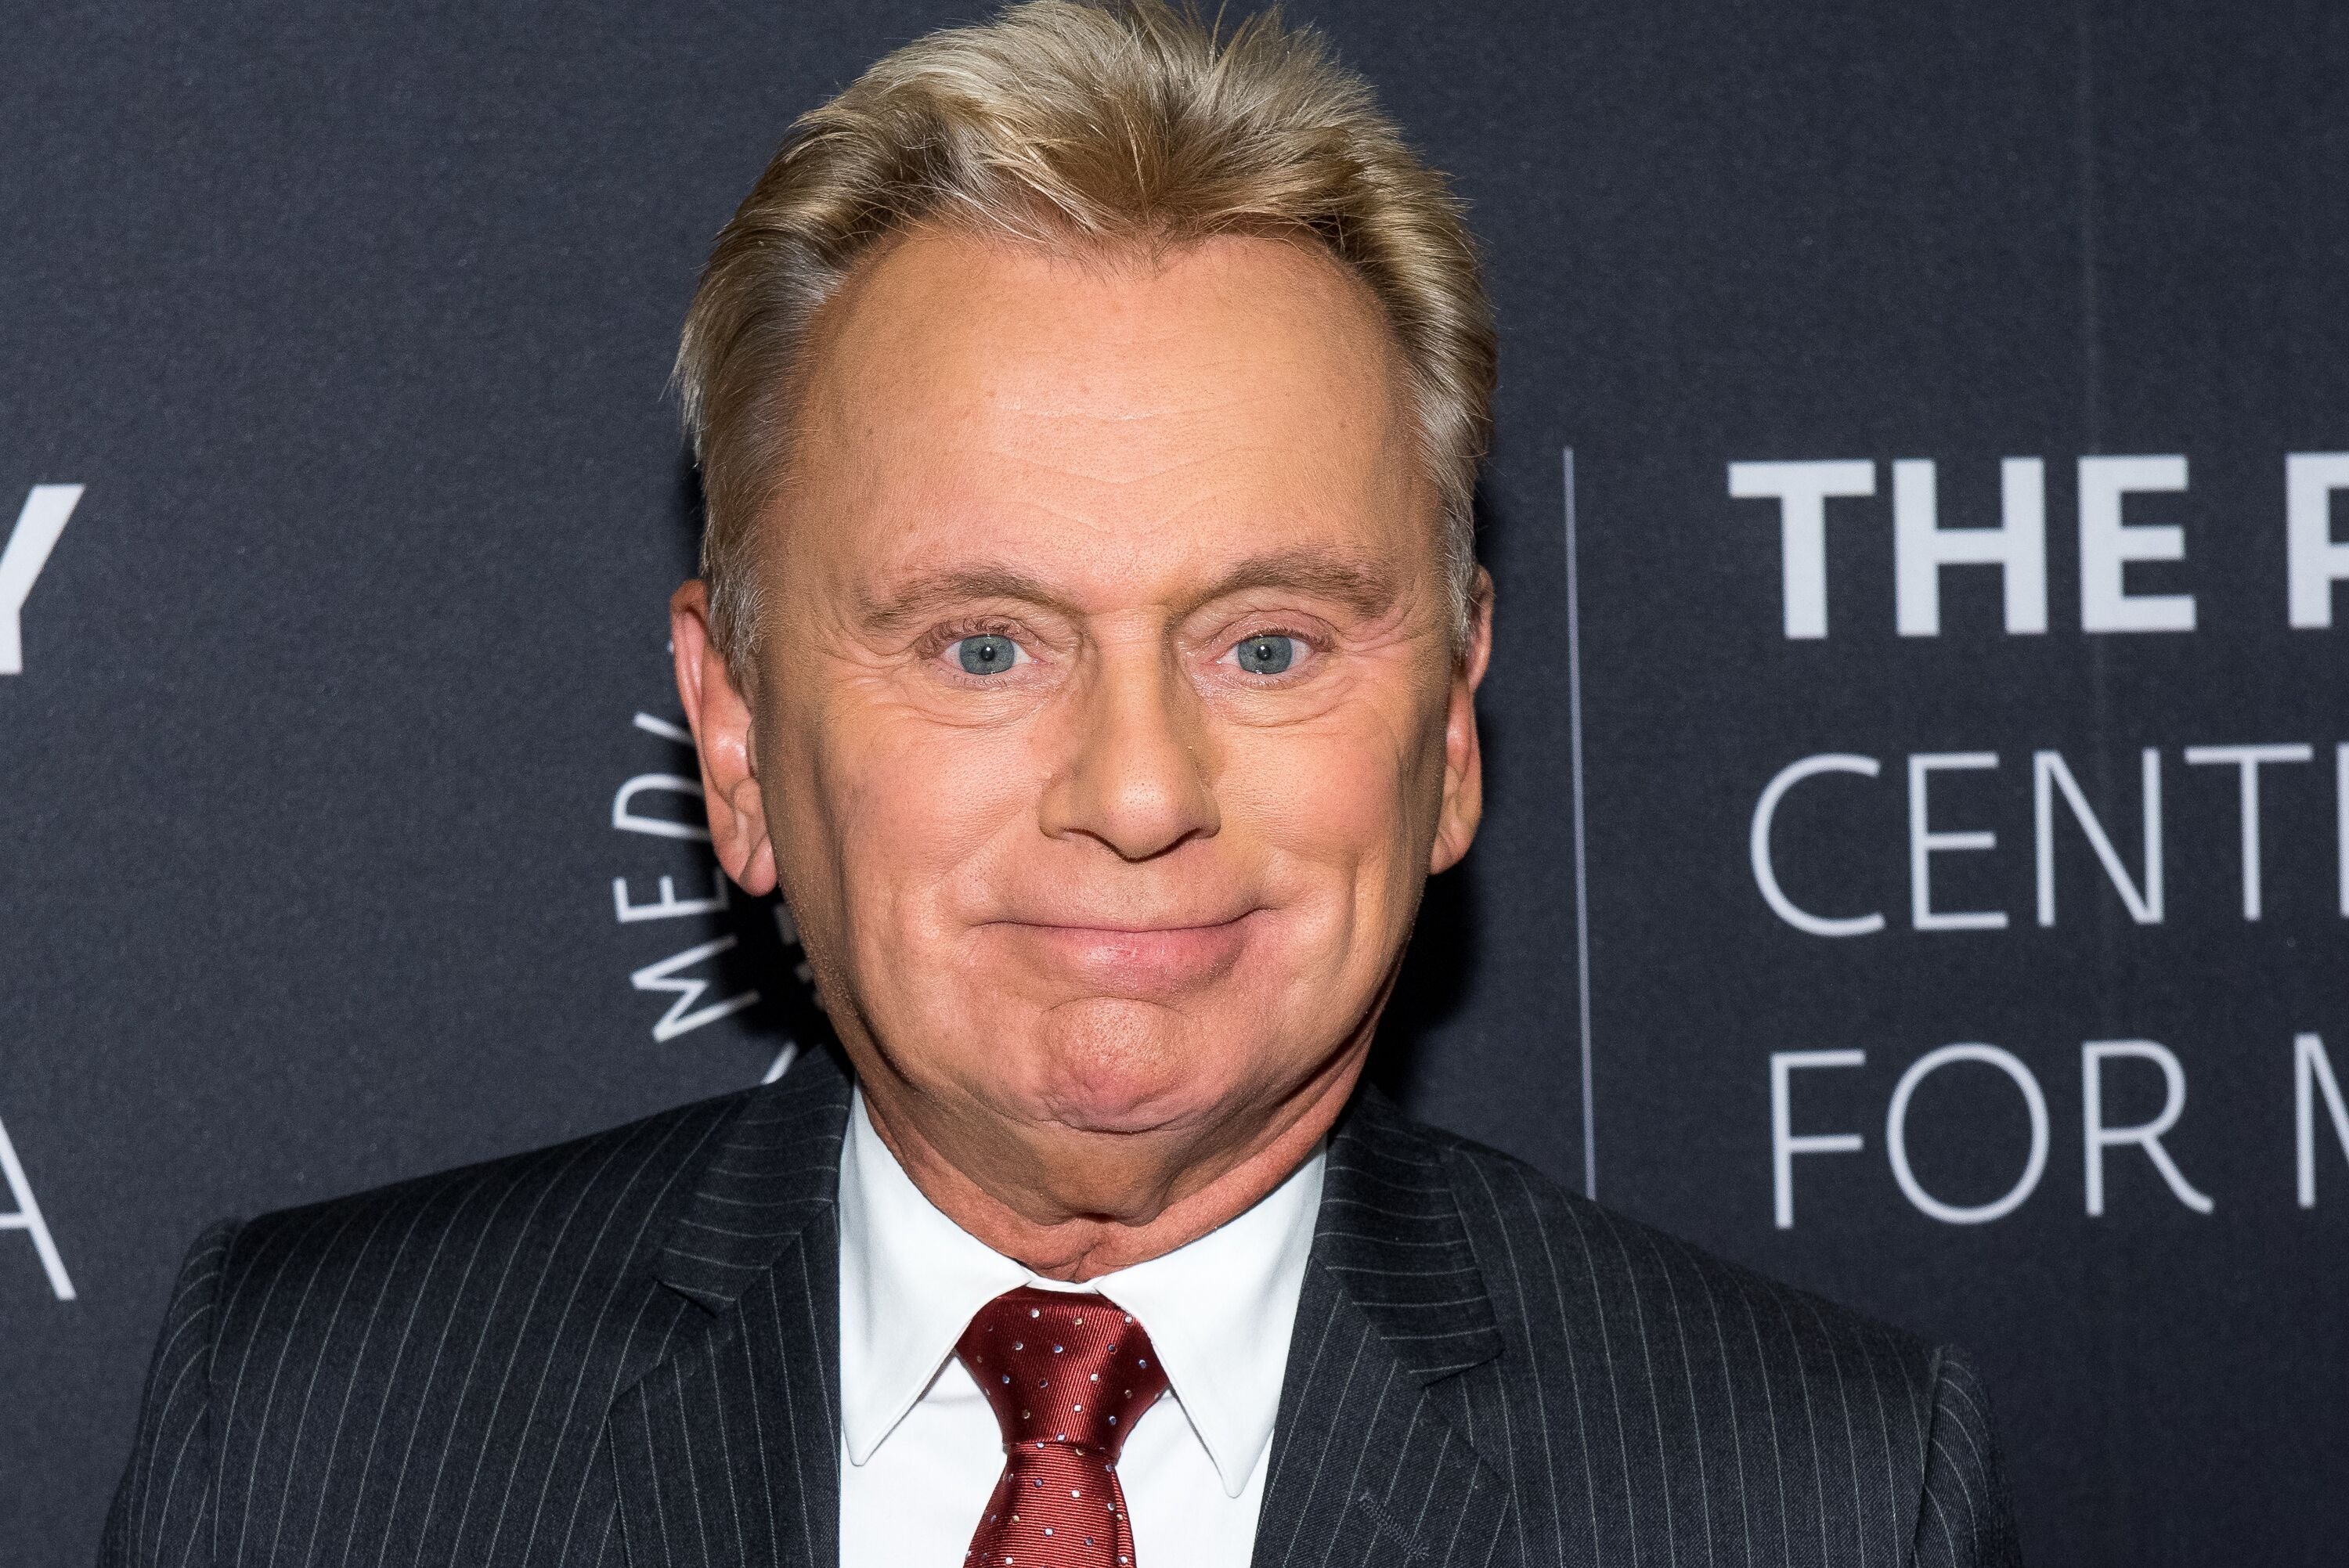 Pat Sajak at The Paley Center For Media Presents Wheel Of Fortune 35 Years As America's Game on November 15, 2017, in New York City | Photo: Mike Pont/Getty Images